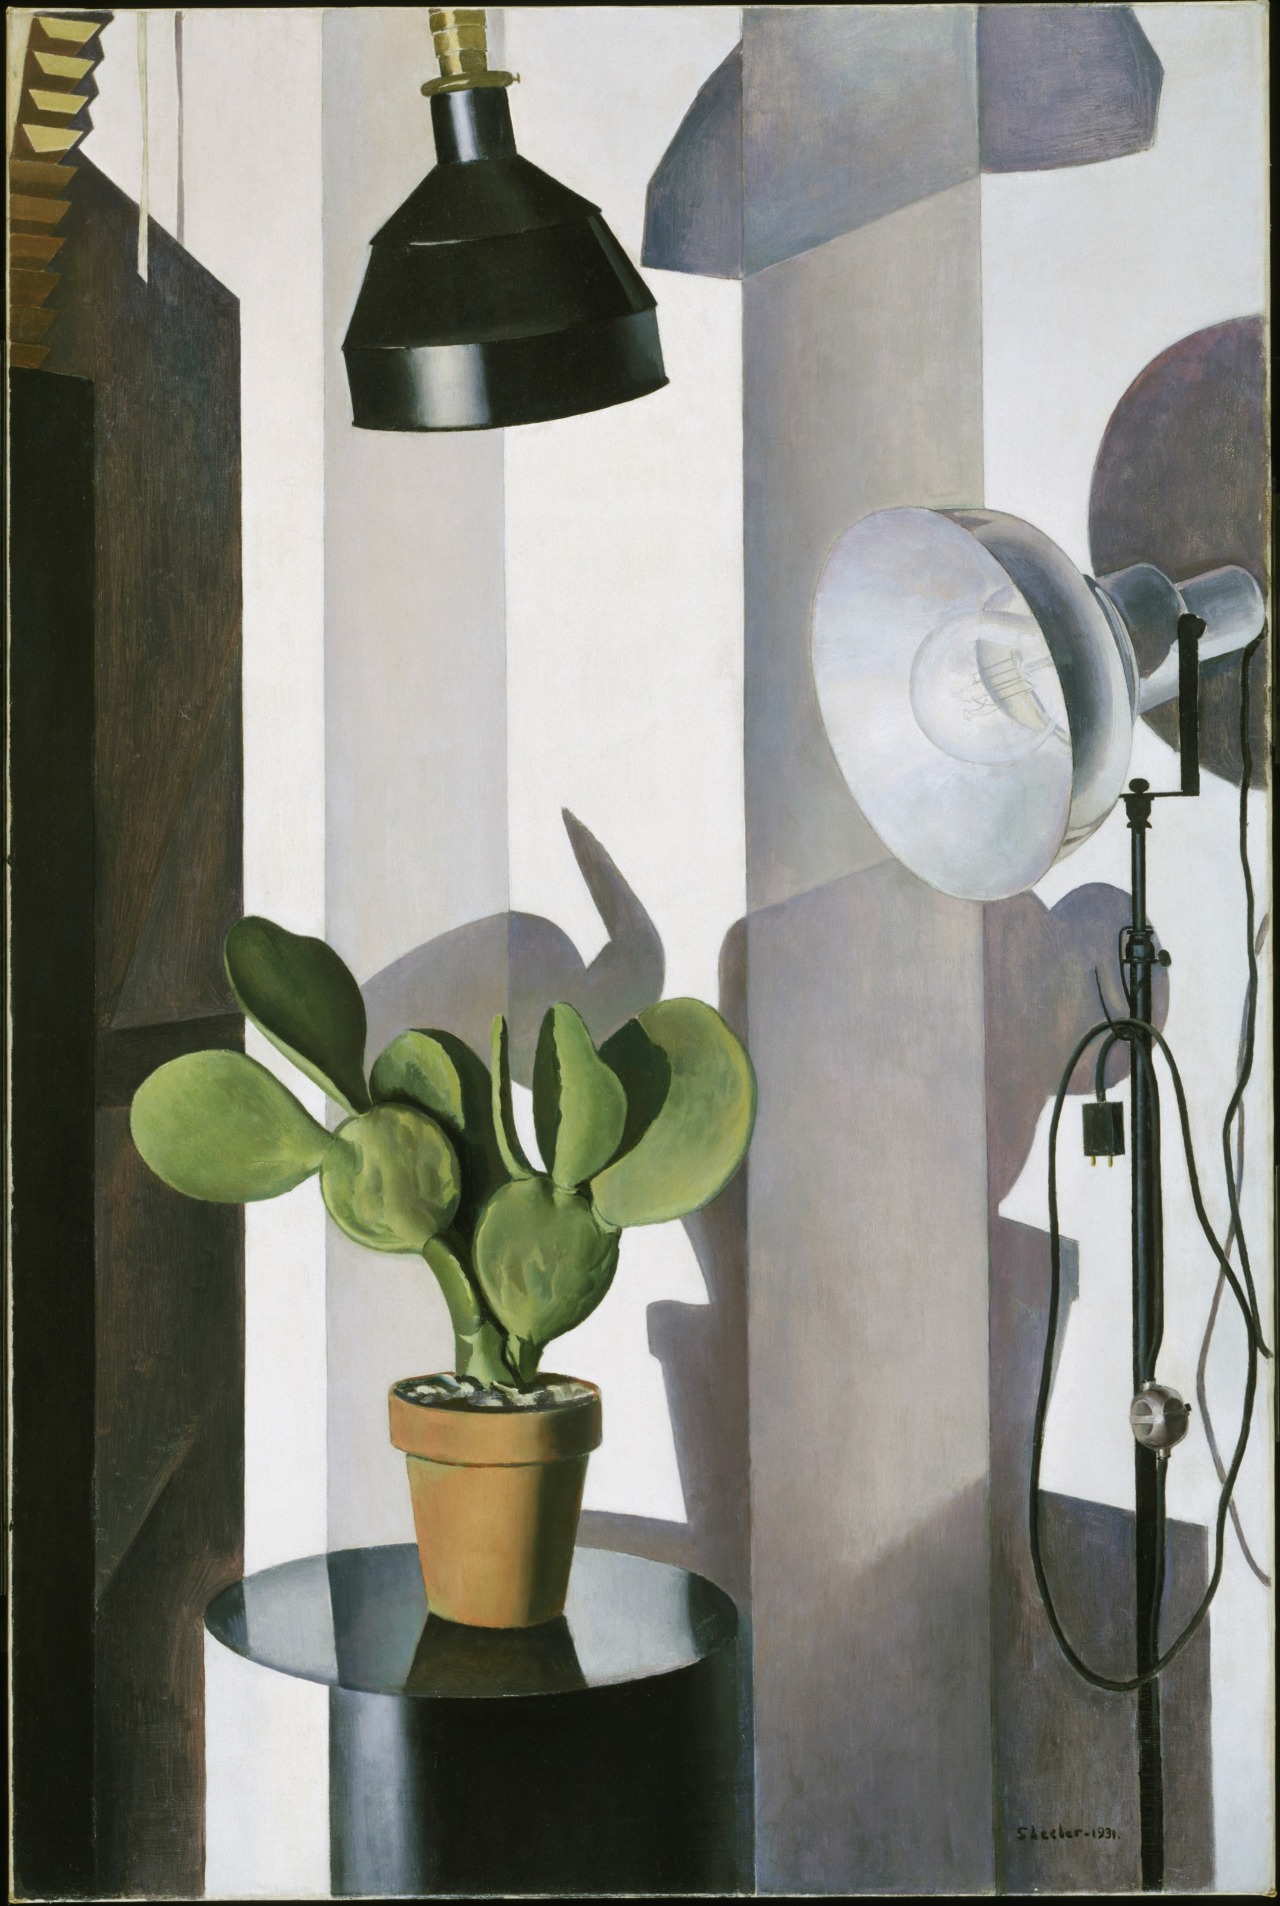 philamuseum:

What do you think Charles Sheeler was trying to express with this still life painting? Share pictures of still life that represent you with #StillLifeSelfie for a chance to win a prize package including Terrain, Federal Donuts, and Art in the Age of Mechanical Reproduction gift cards as well as a two-night weekend stay at the Radisson Blu Warwick Hotel, Philadelphia. More information here.
“Cactus,” 1931, by Charles Sheeler
